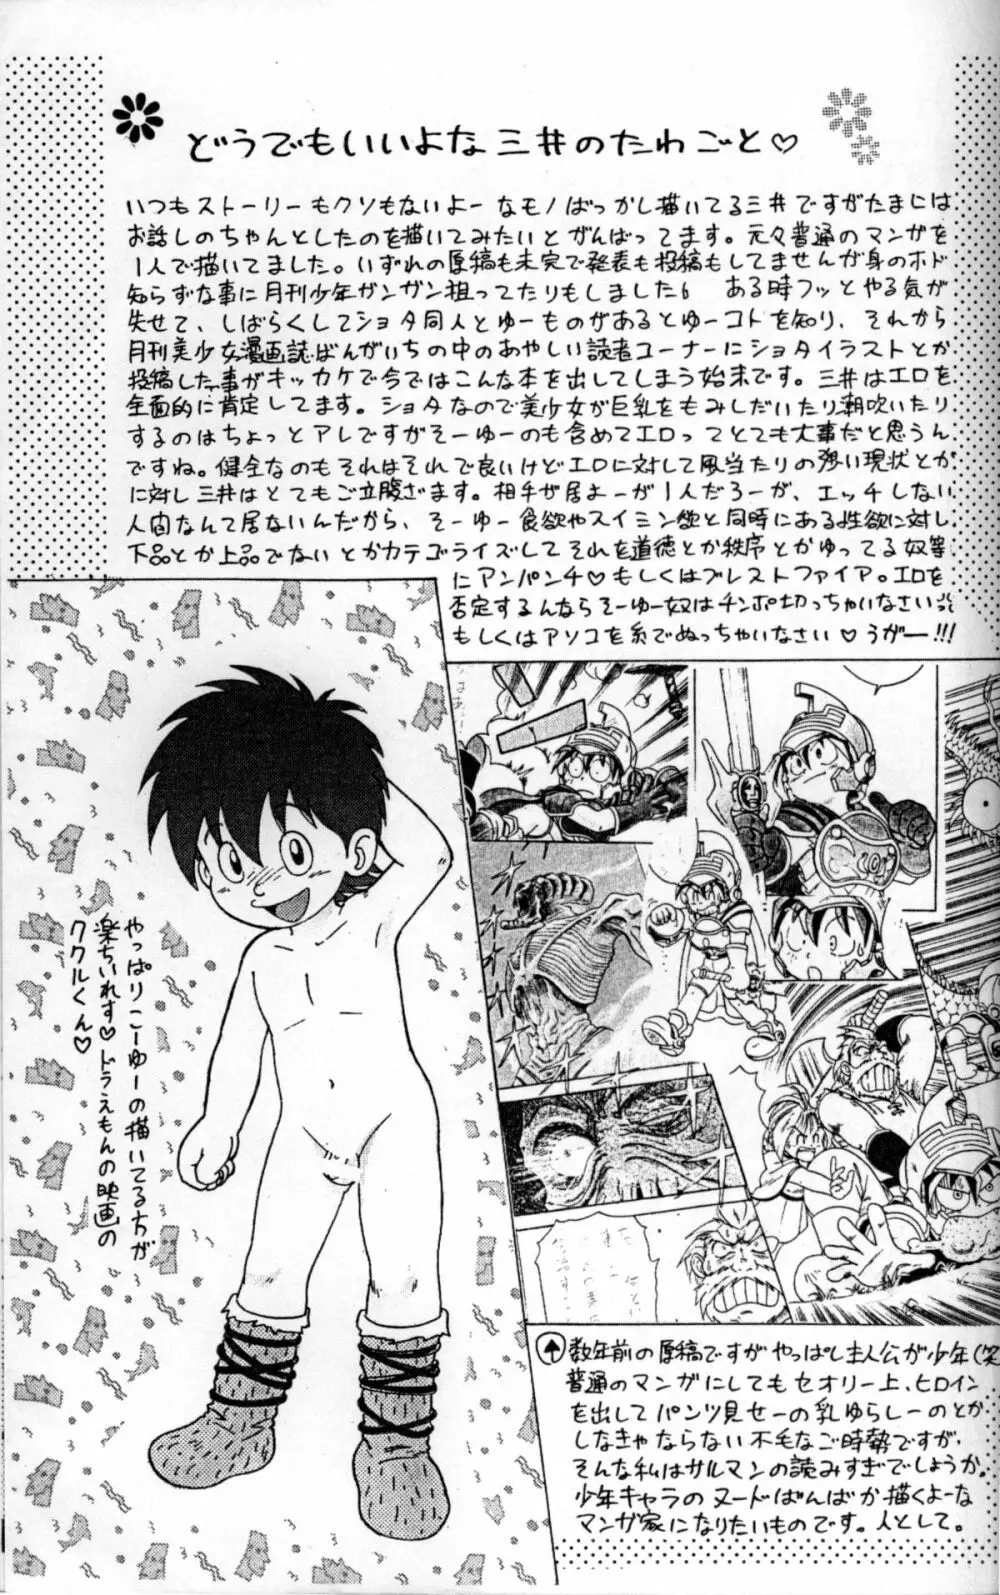 Mitsui Jun - Dreamer’s Only - Anime Shota Character Mix Page.14